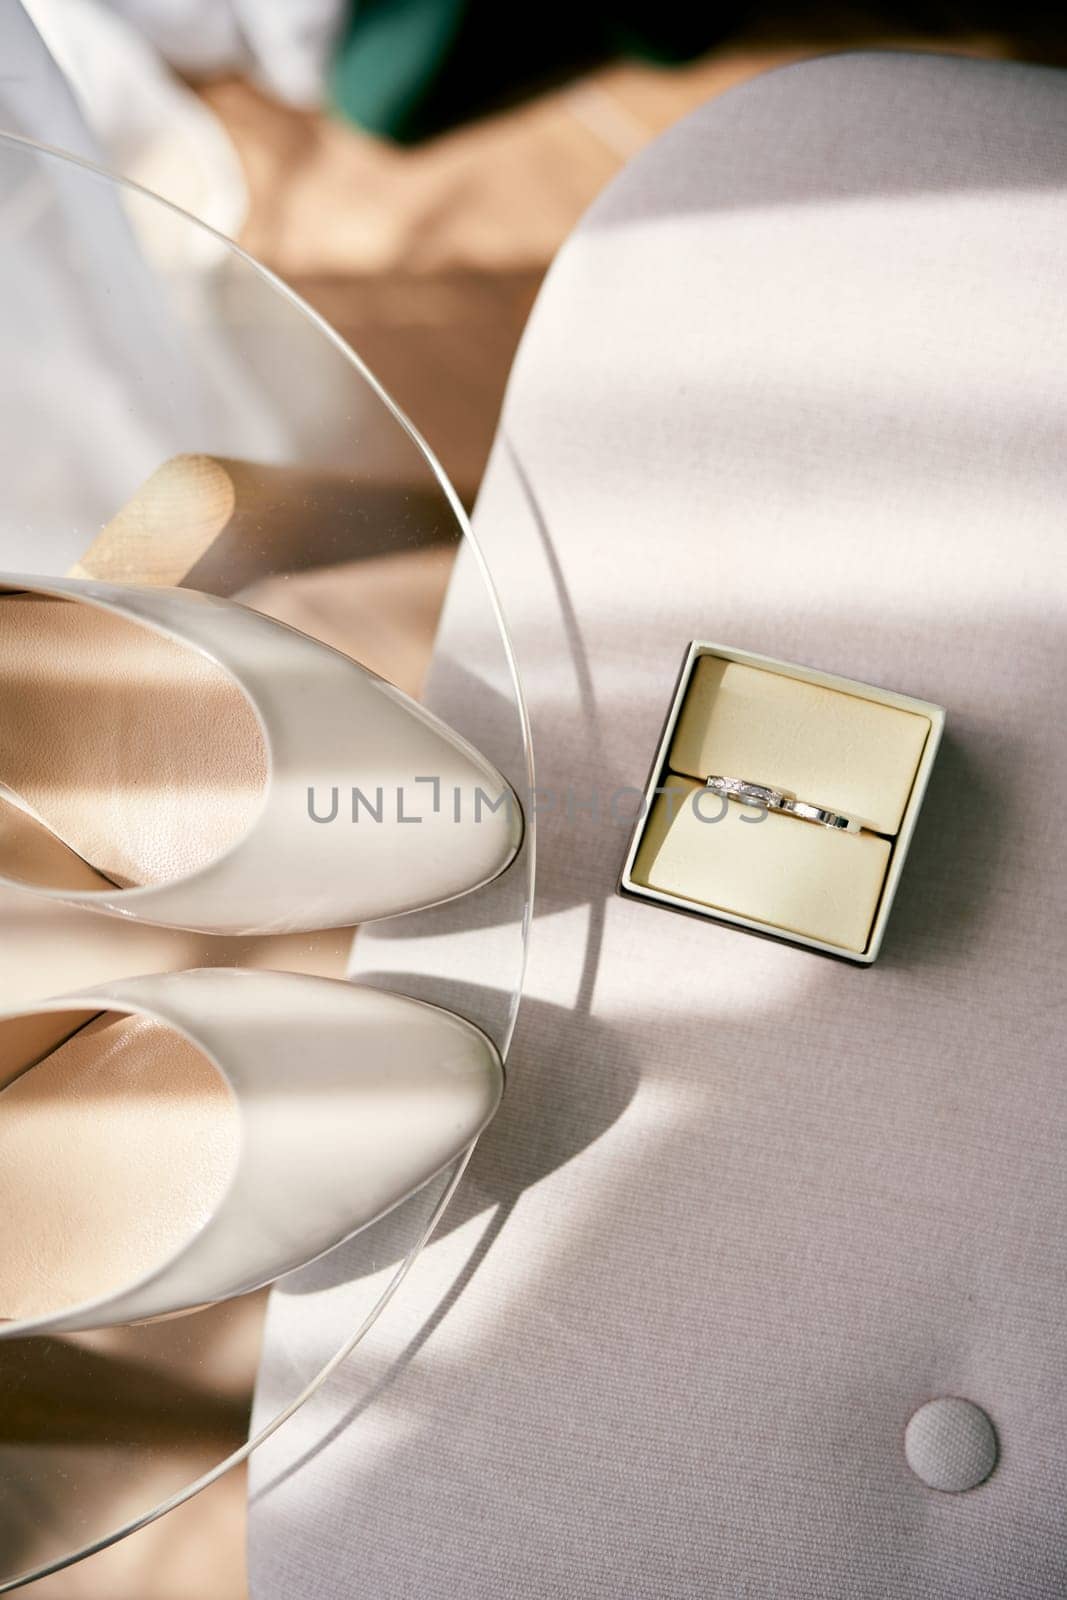 Box of wedding rings stands on a chair next to the table with the bride shoes by Nadtochiy